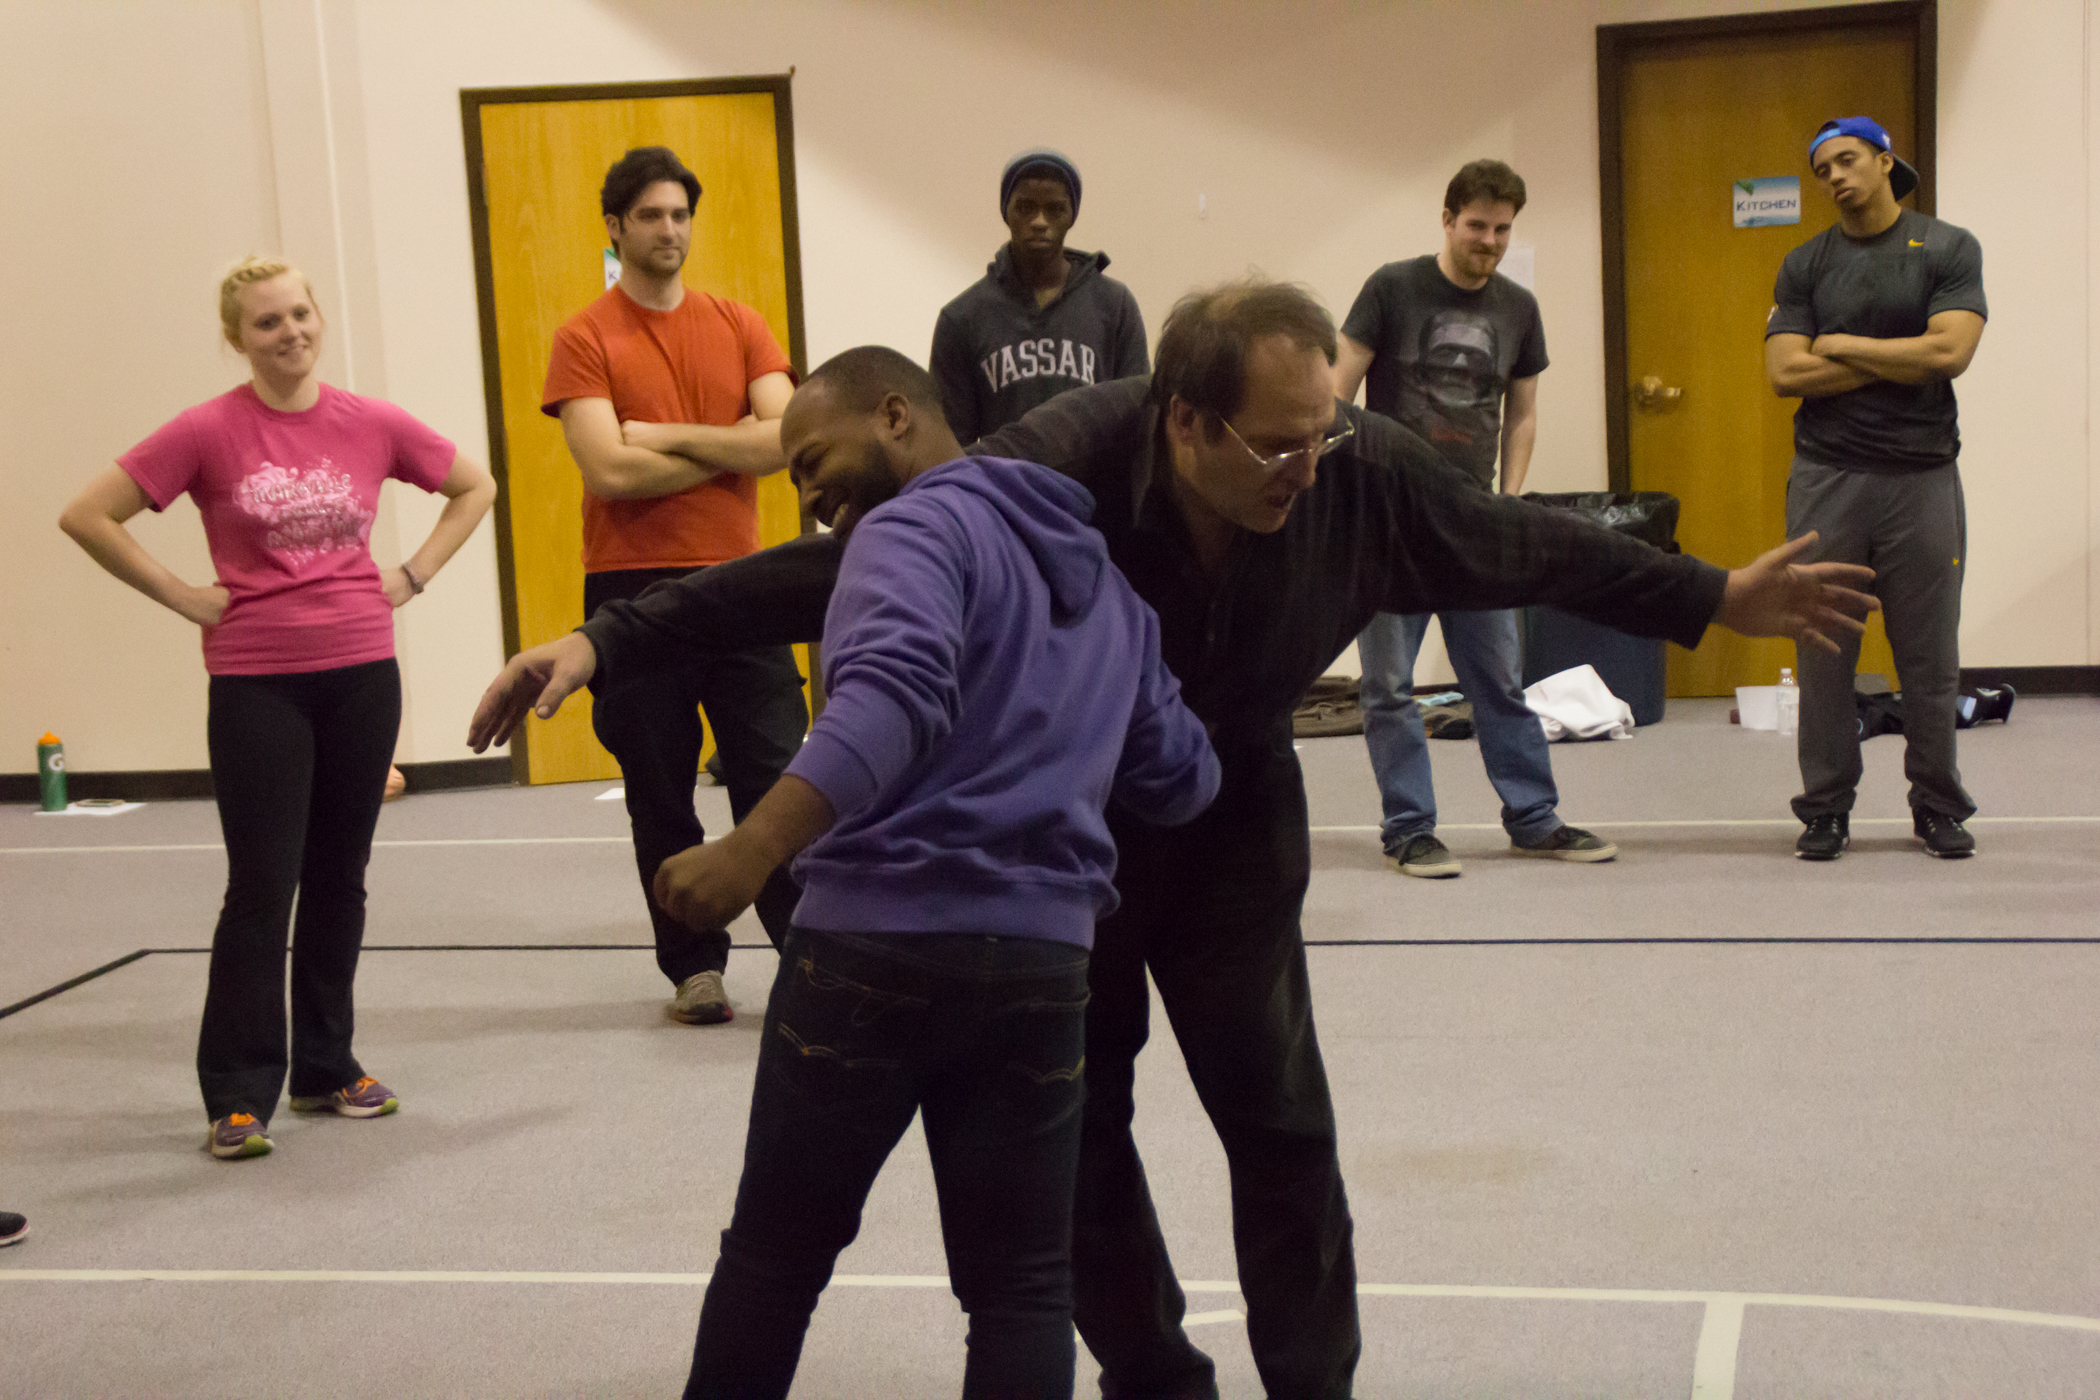 Richard Buswell teaching fight techniques on Day 1 of stunt training.